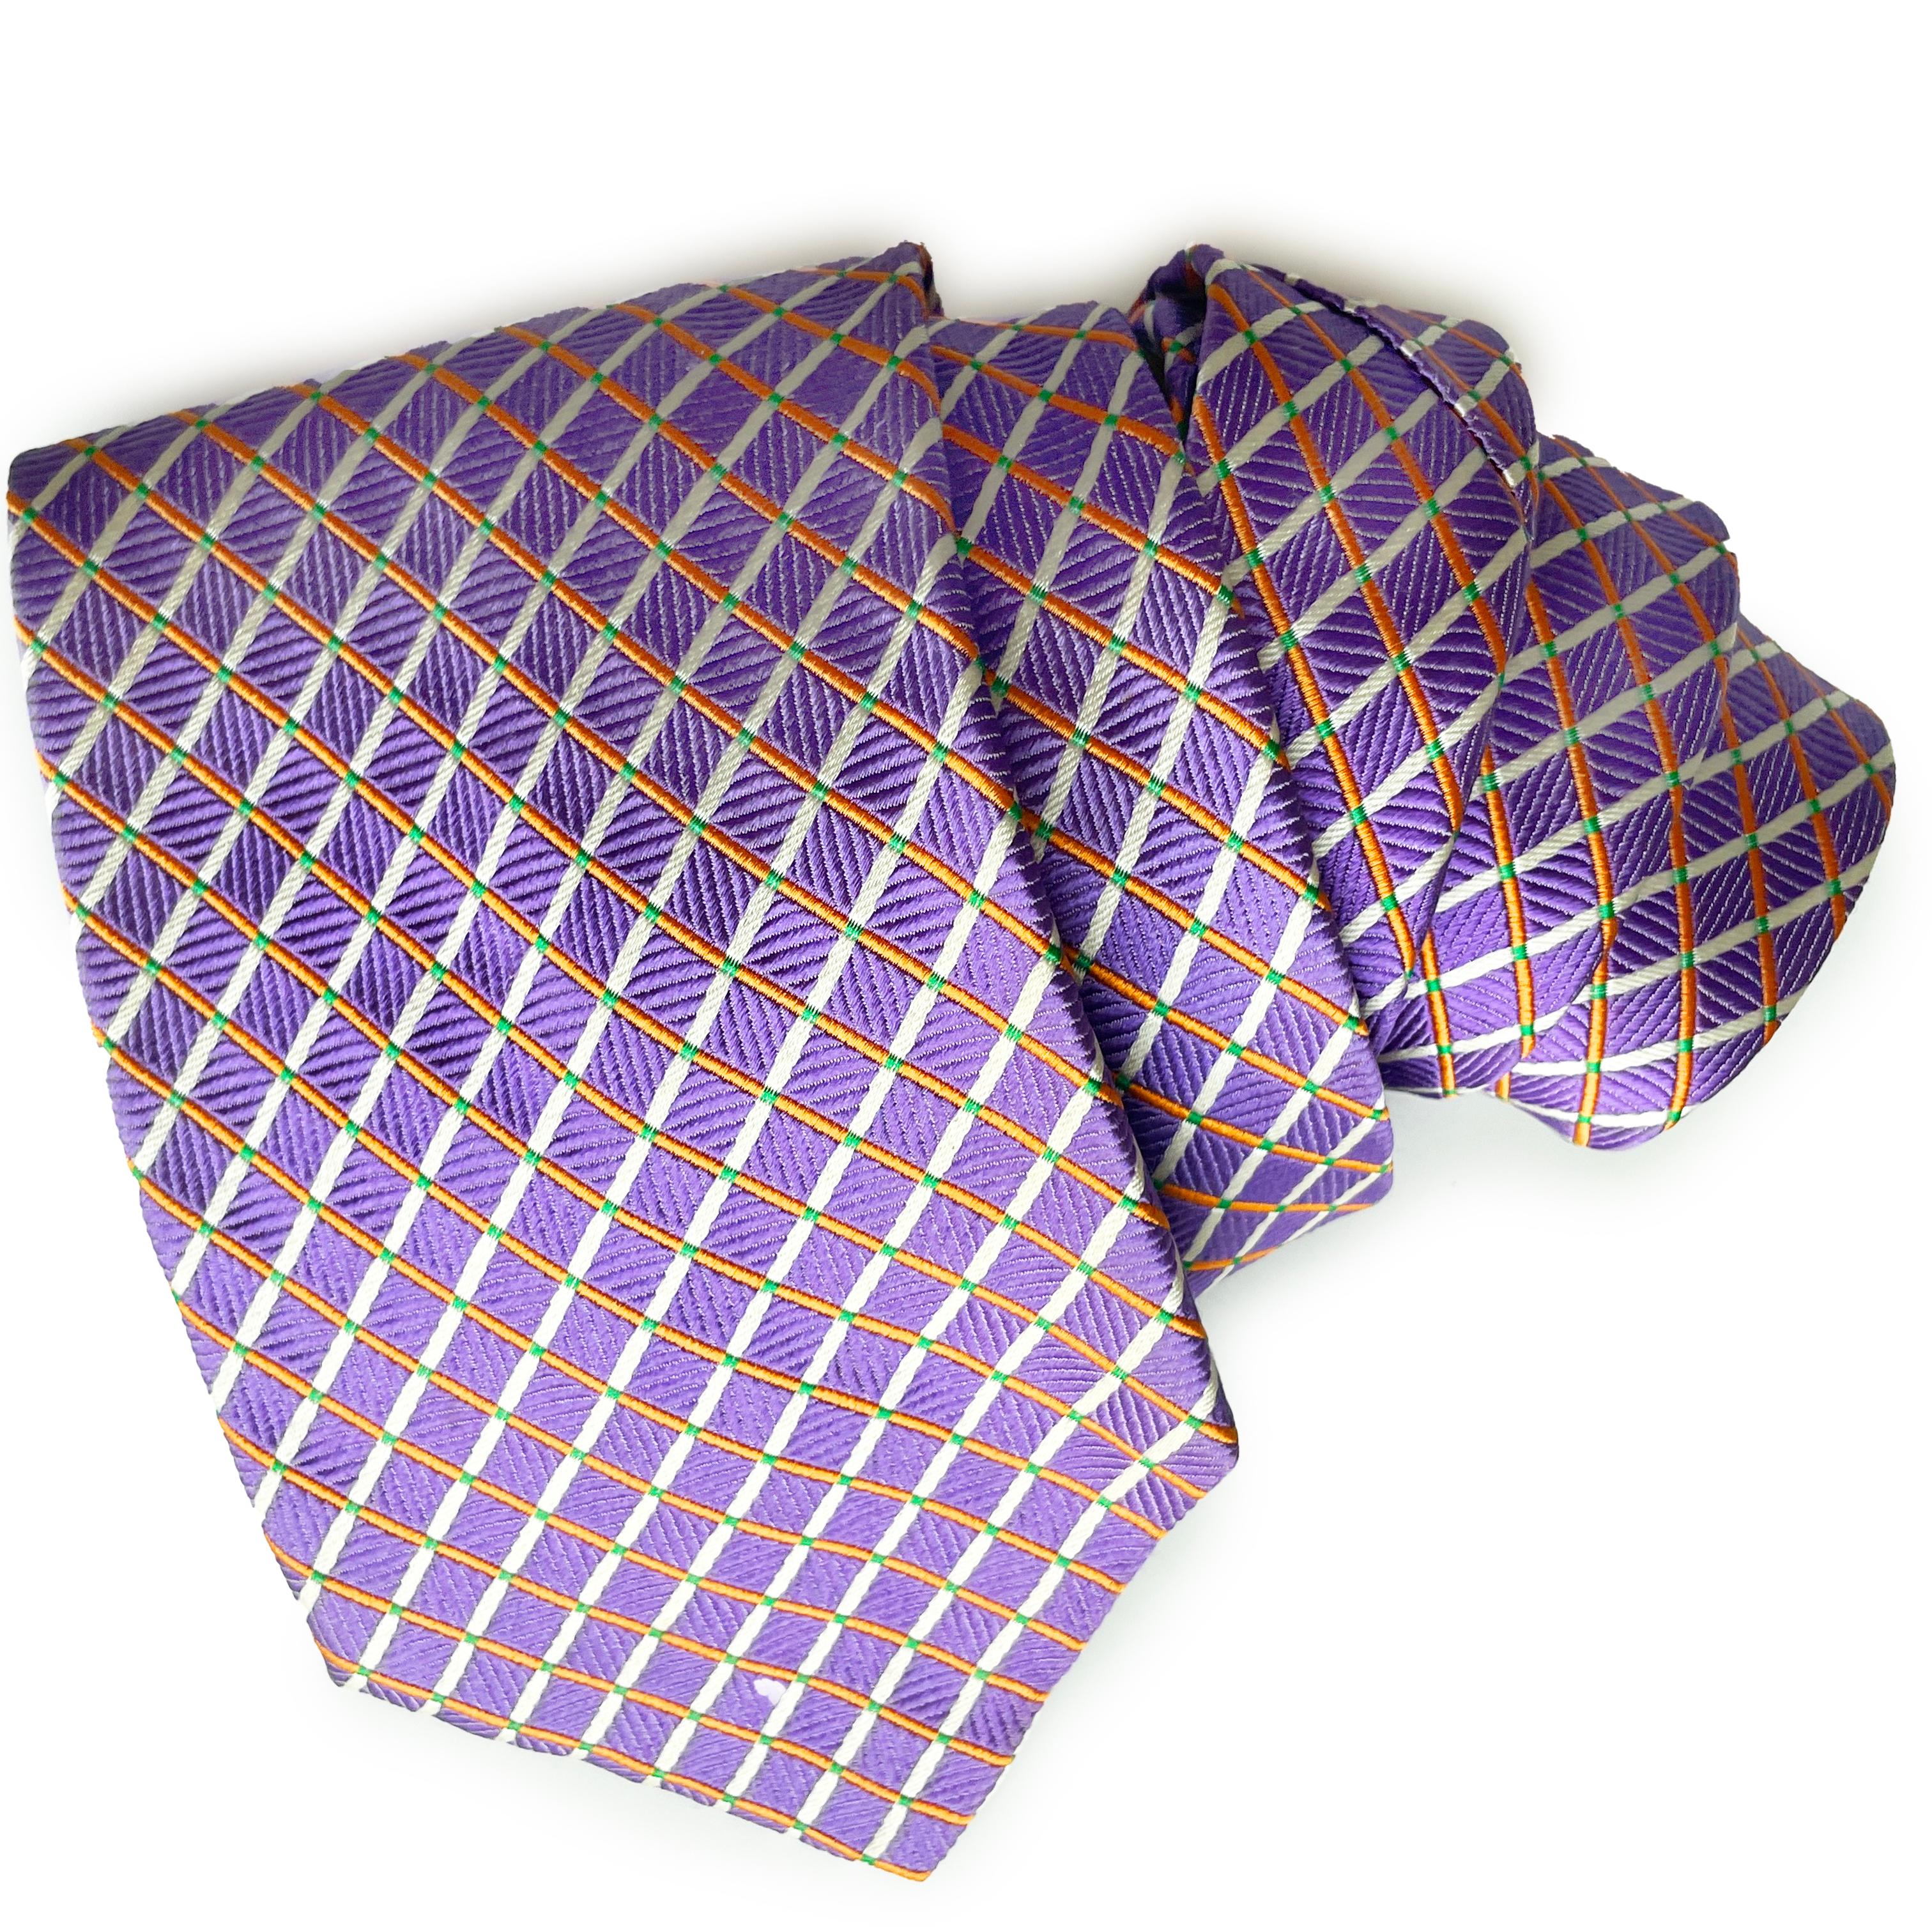 Preowned Versace silk necktie, likely made in the 2000s.  Made from silk, it features a luxe geometric pattern in shades of white and melon against a lilac hued textured background.

Perfect for those of you who enjoy luxury accessories - or for